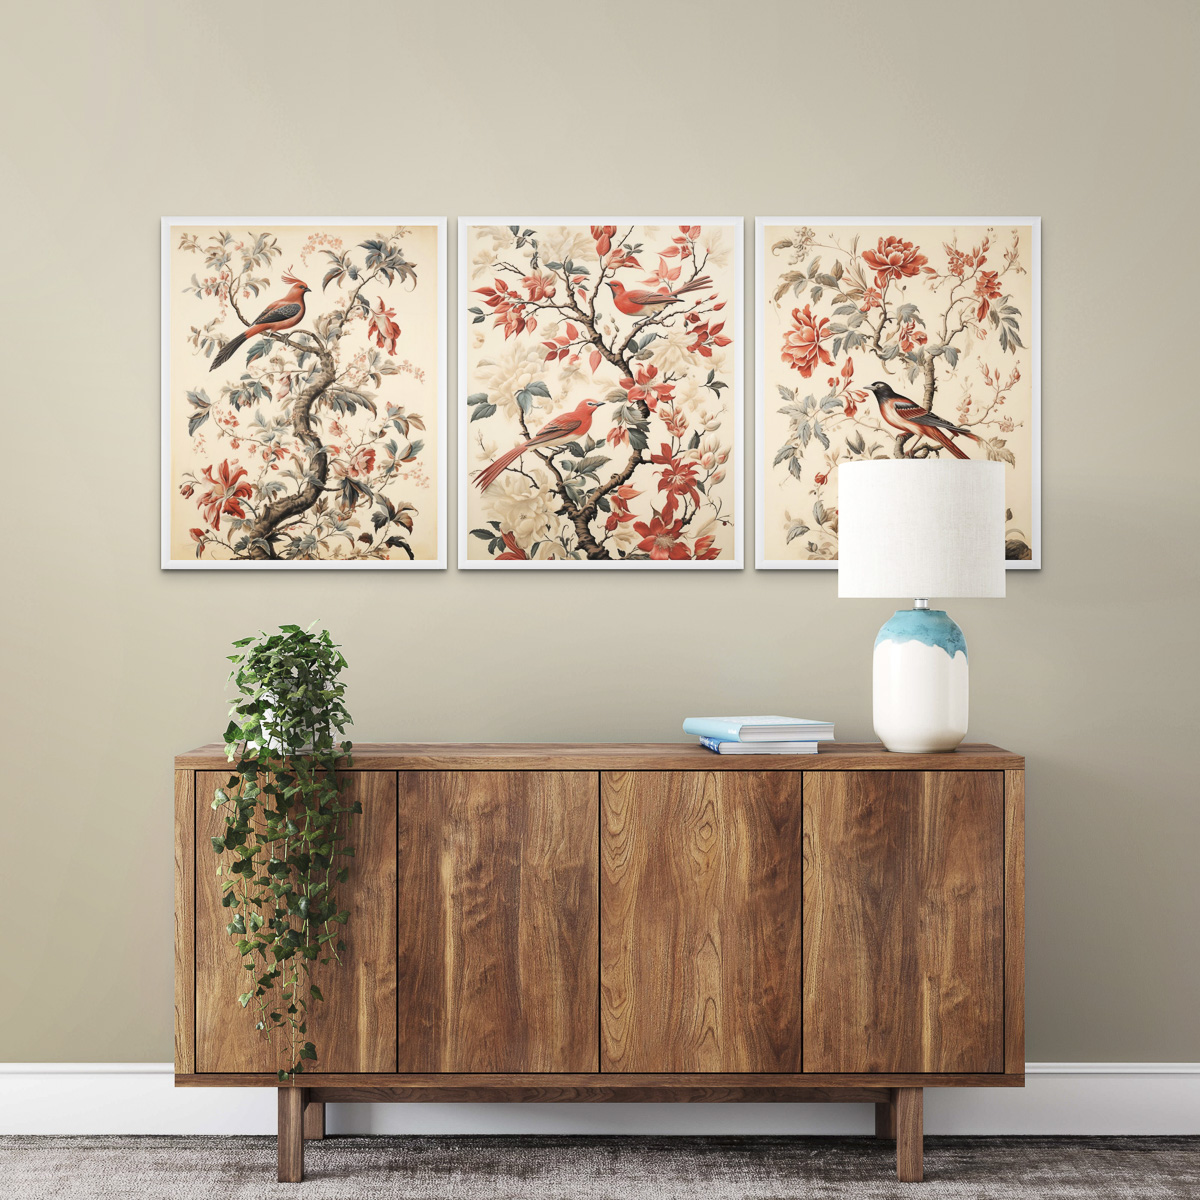 Vintage Floral Birds Wall Art Poster over a Danish Wooden Cabinet